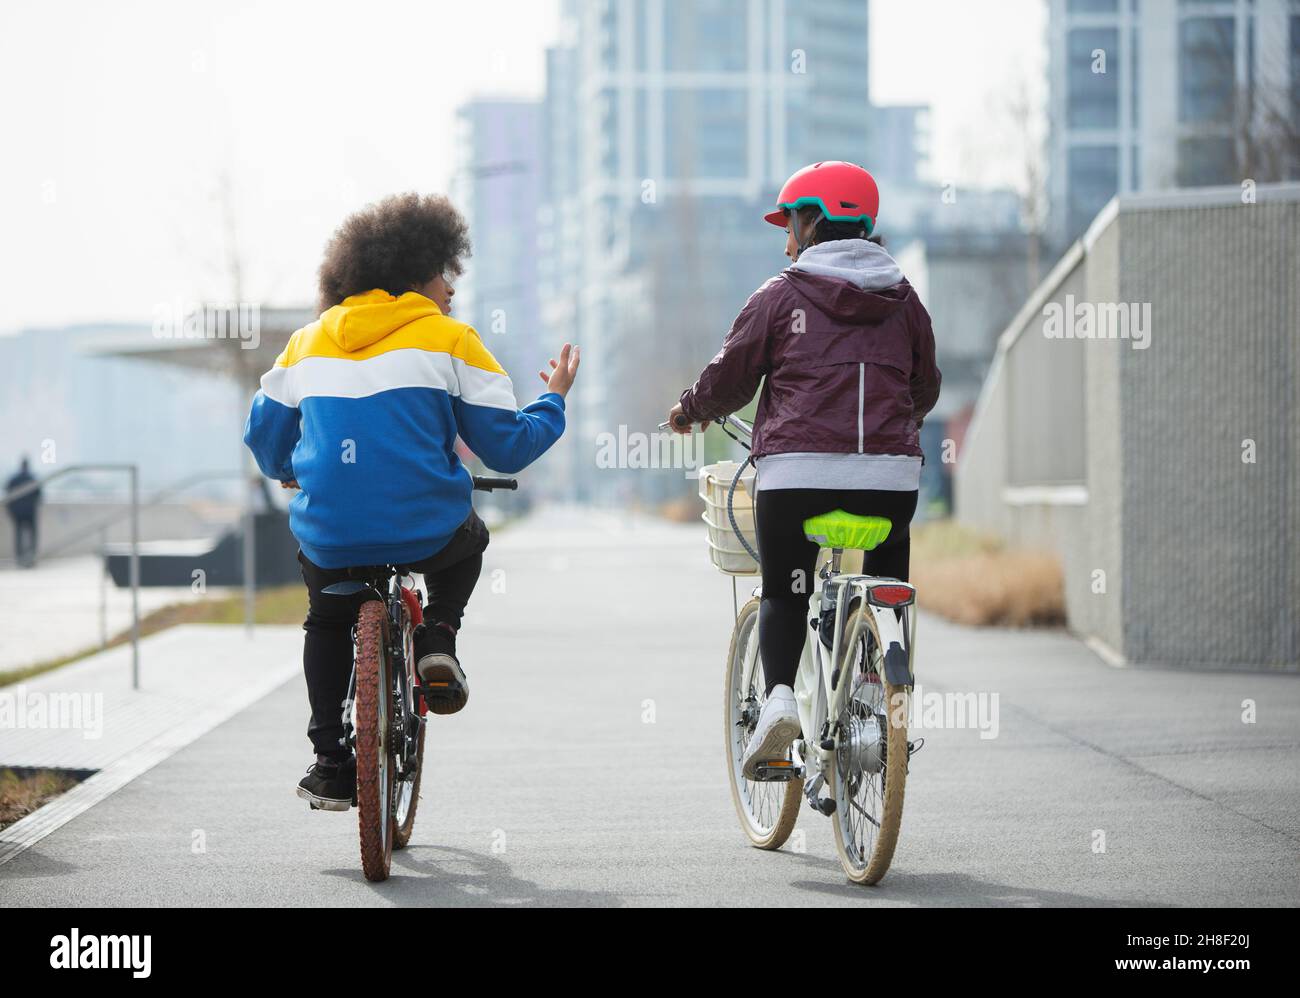 Teen friends riding bicycles on bike path in city Stock Photo